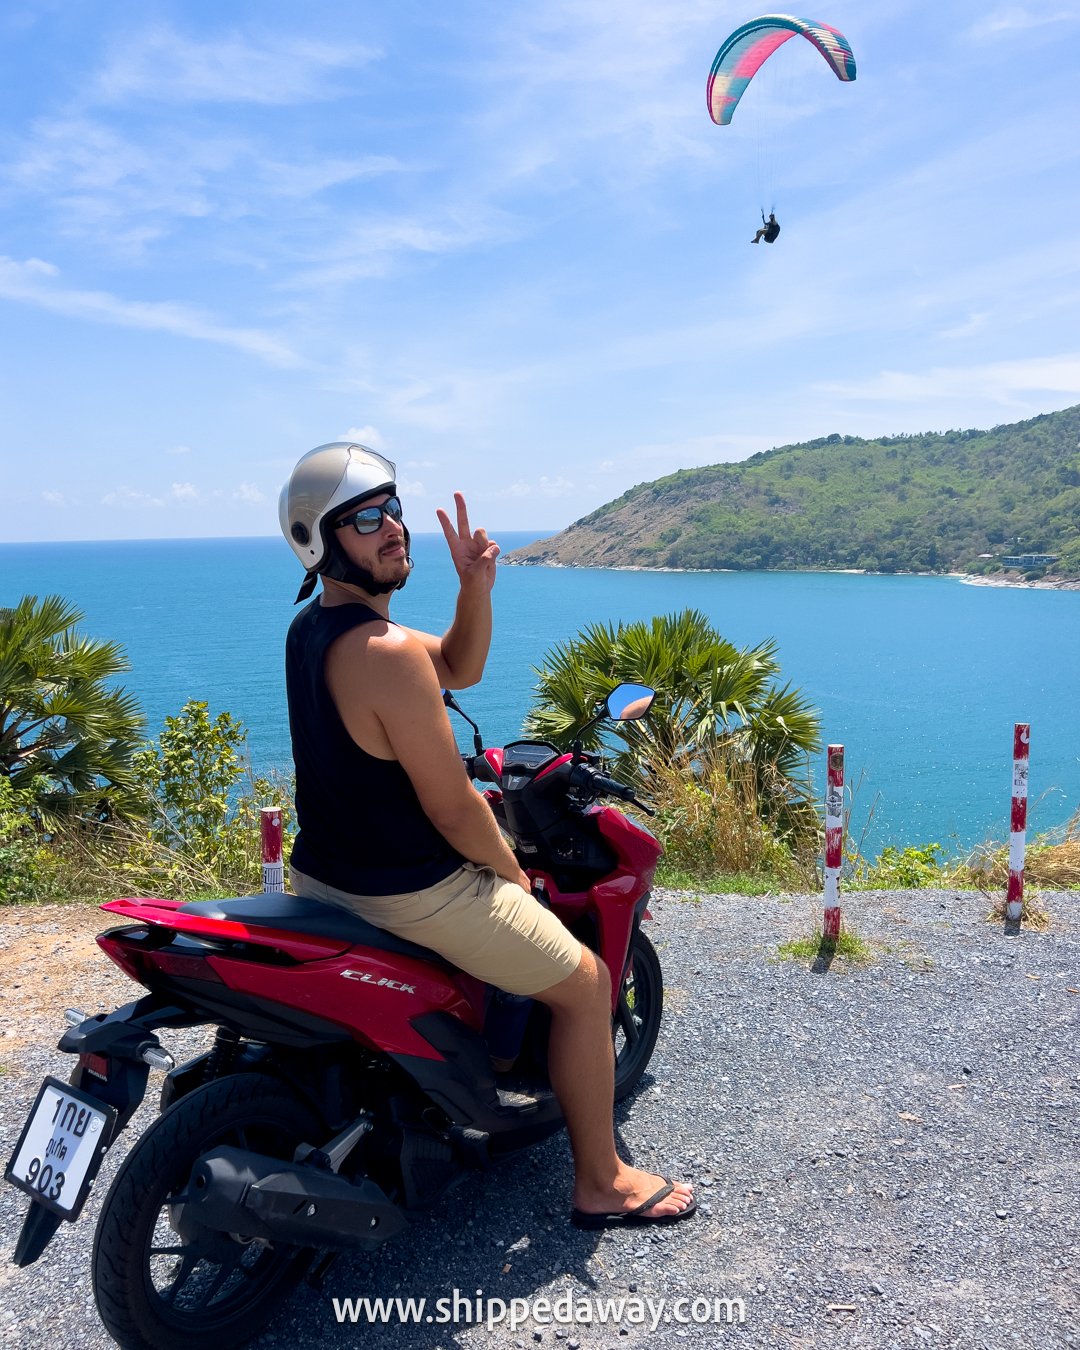 Renting a motorbike scooter in Phuket, Thailand, Exploring Best Viewpoints in Phuket by motorbike